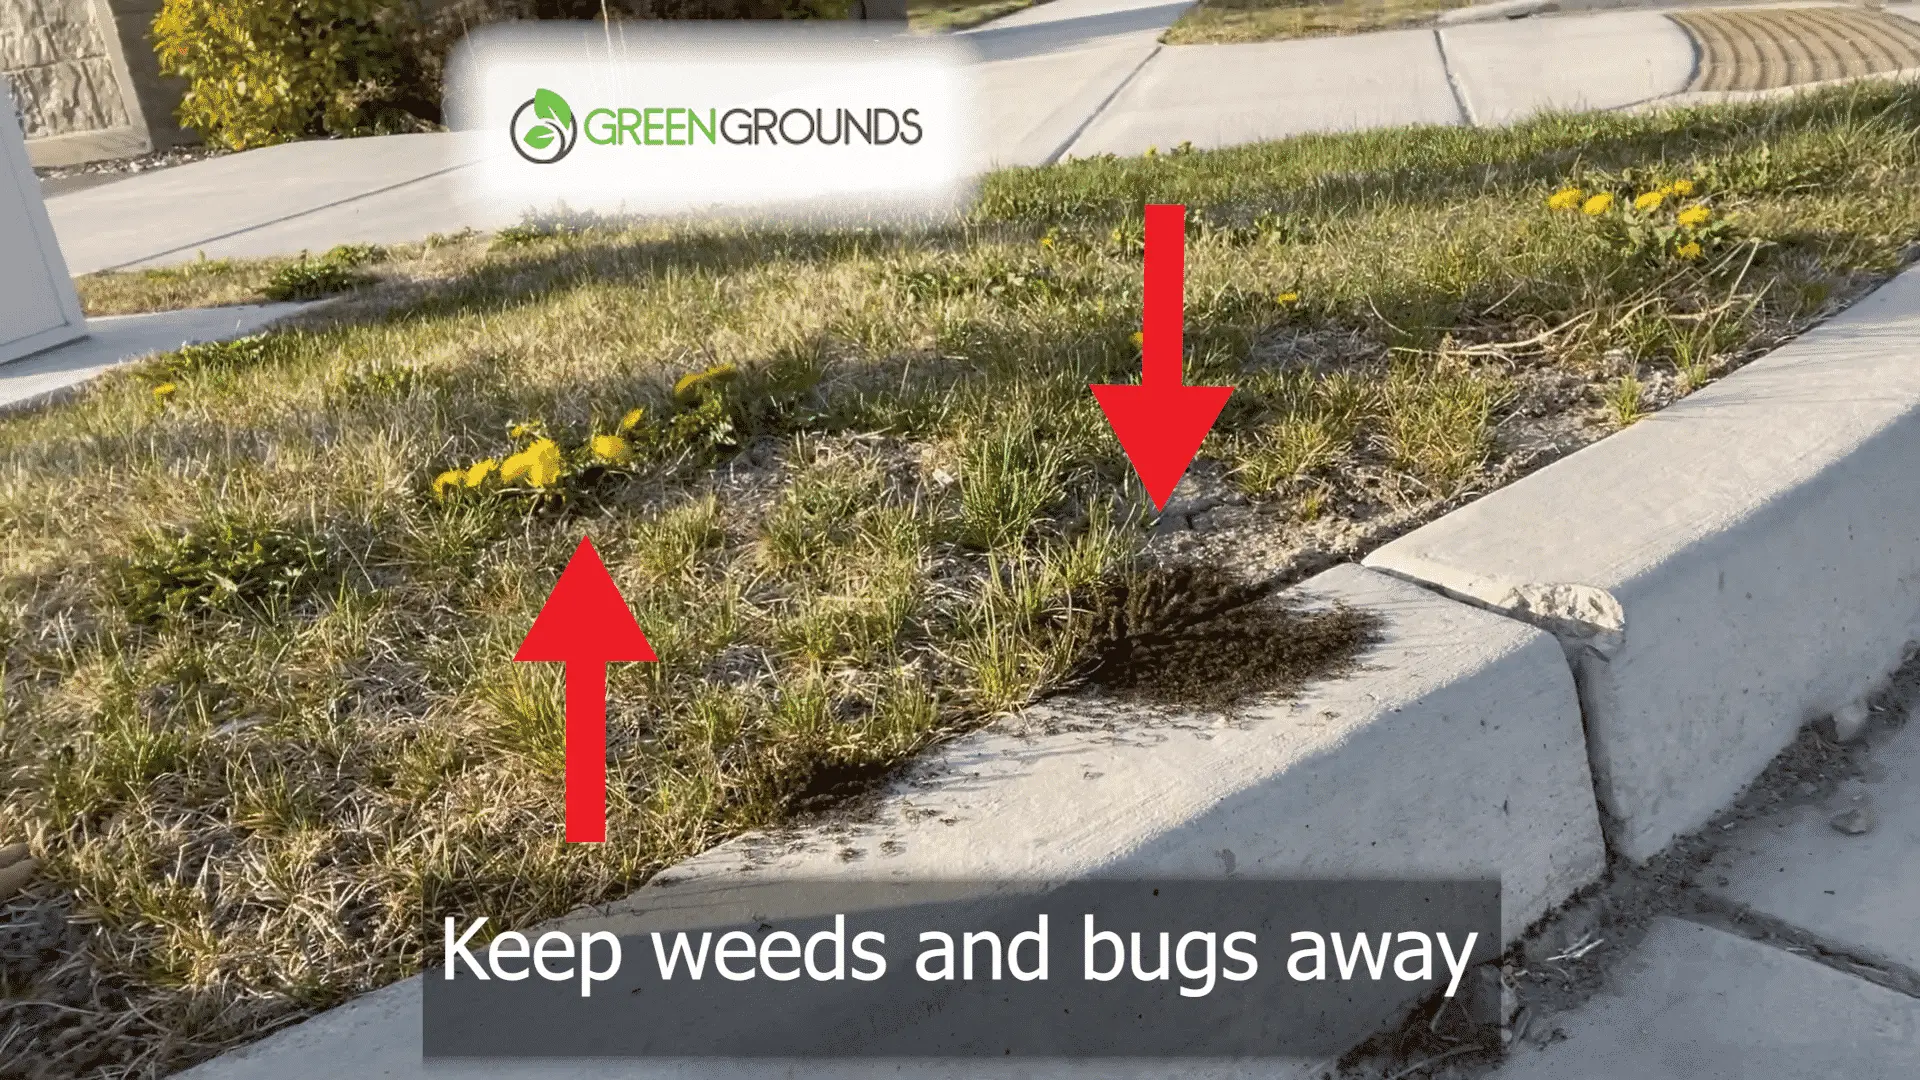 Oh No! Bugs and Weeds are here